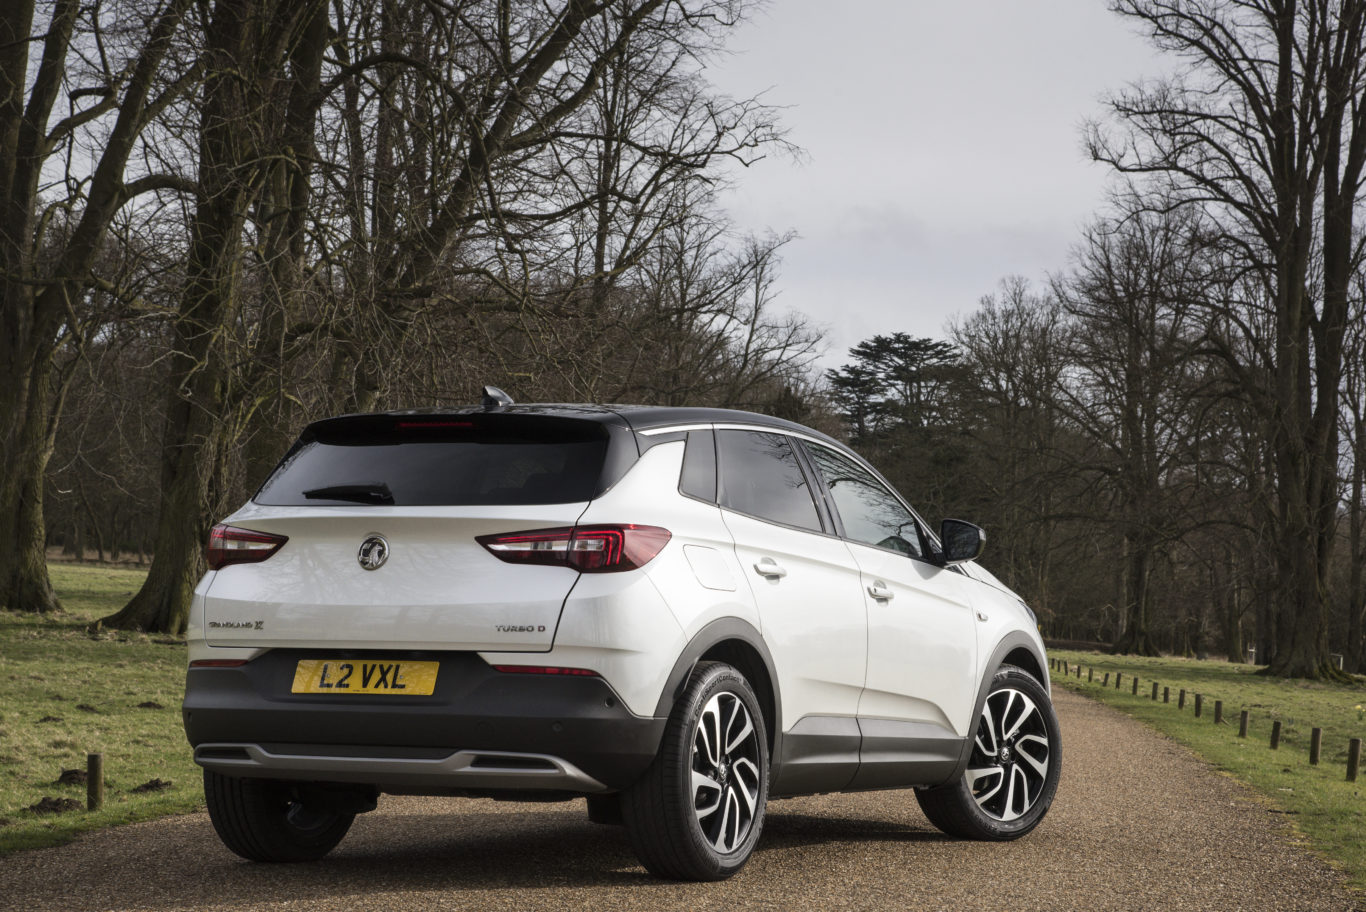 The Grandland X benefits from a large boot